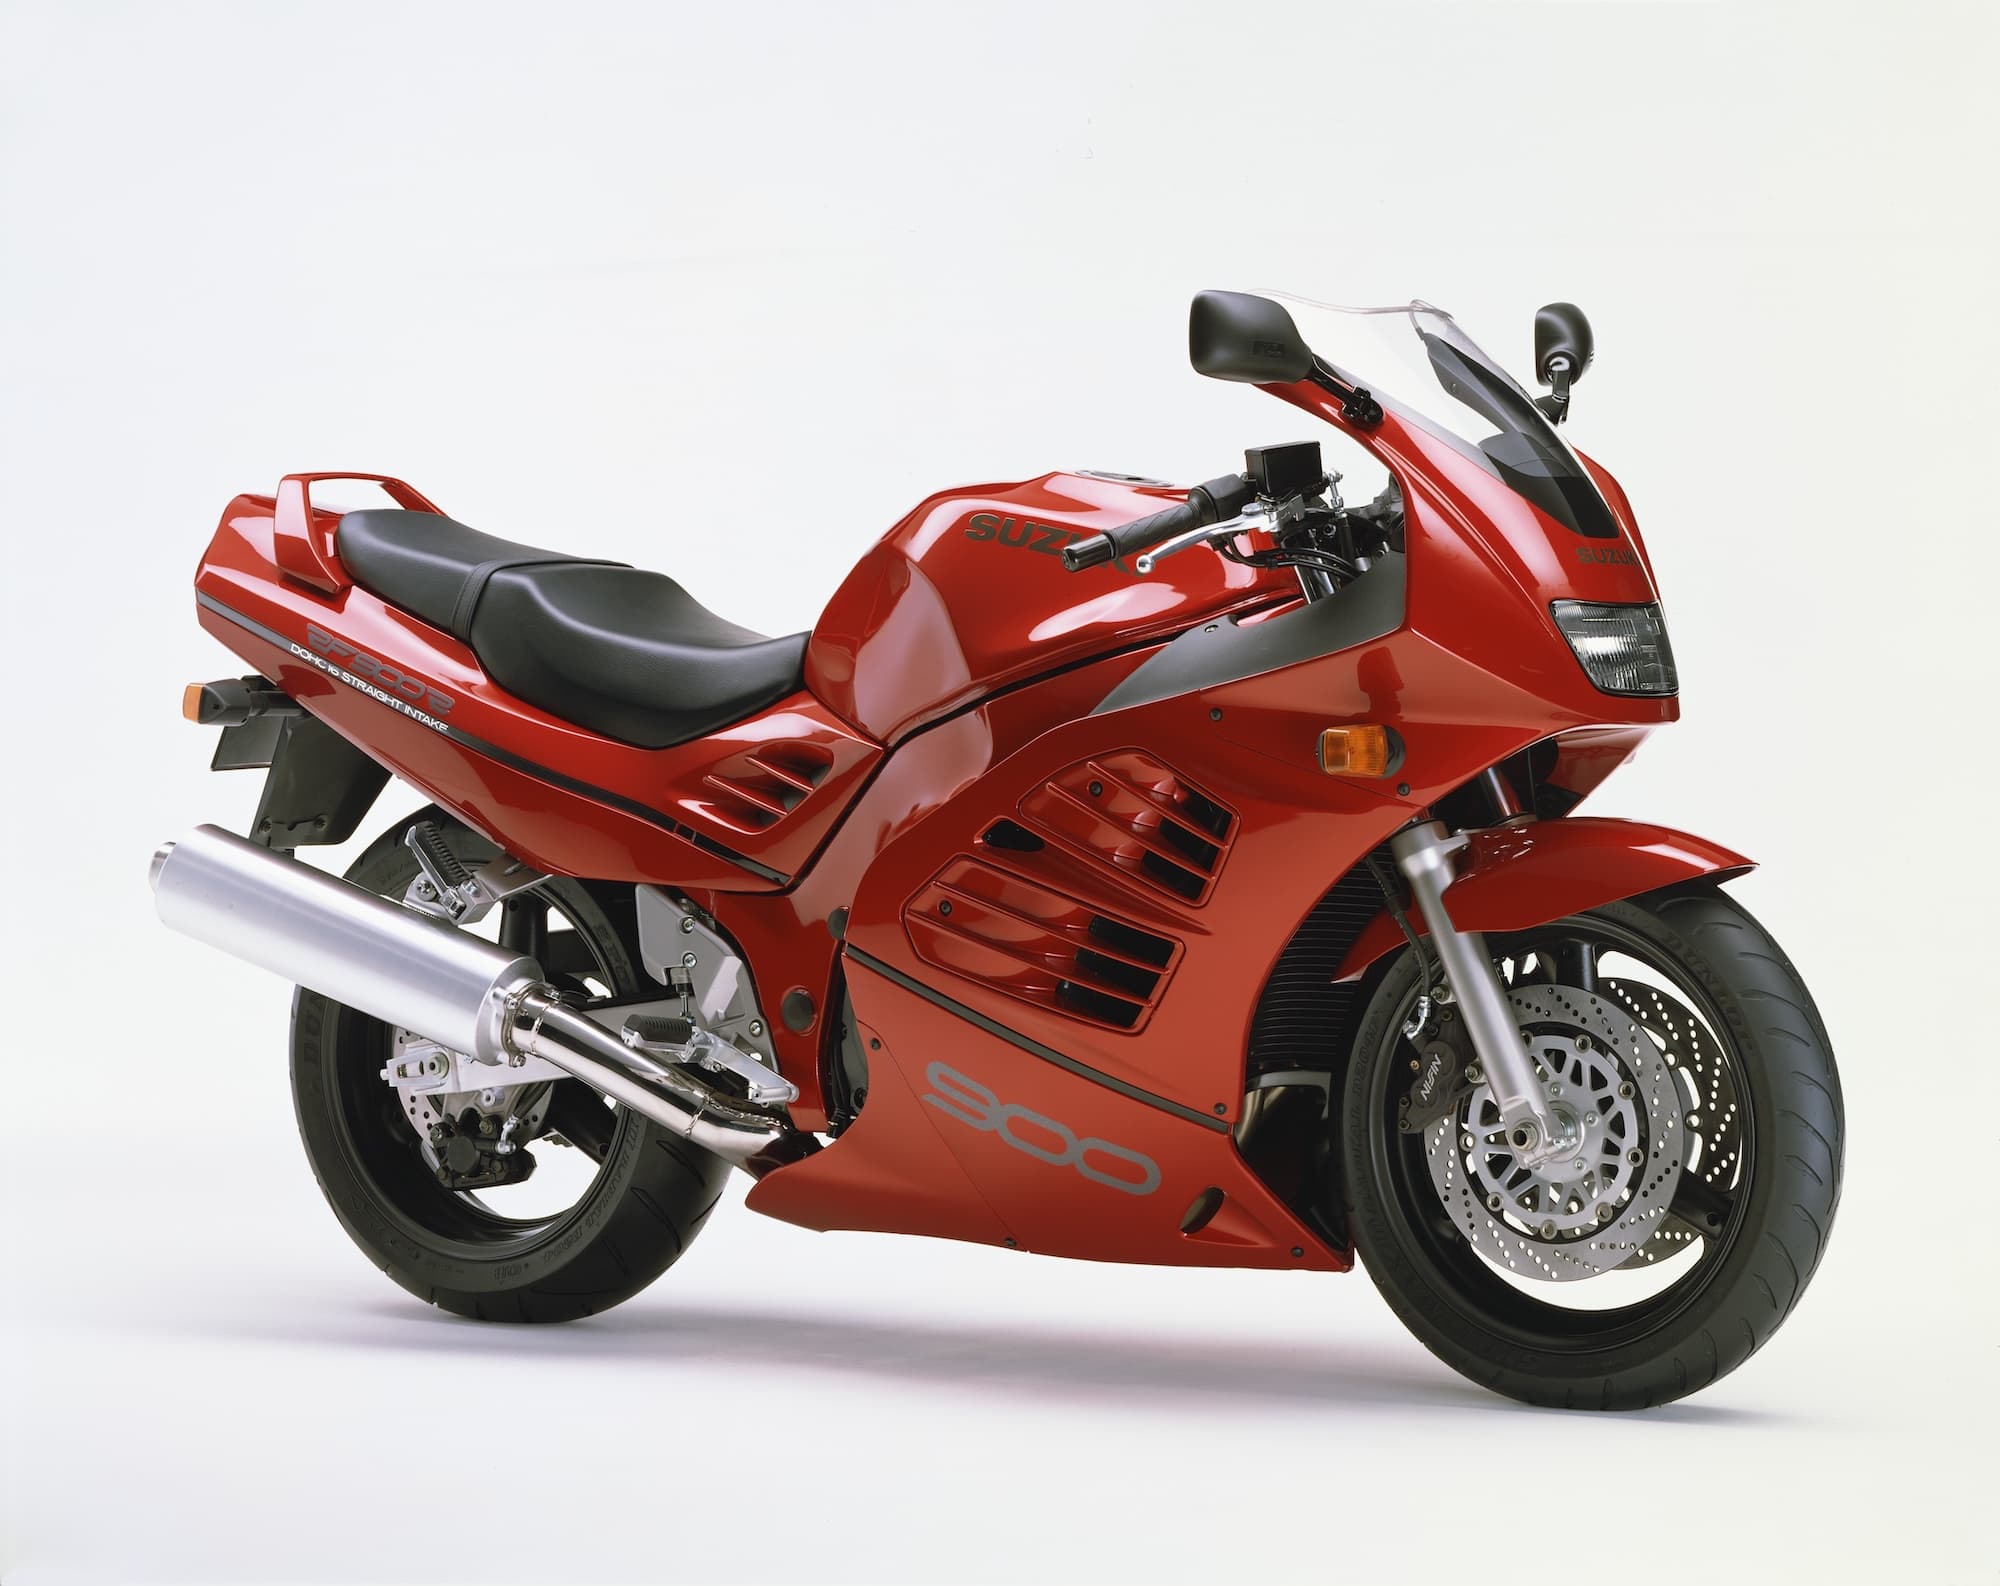 Lily tank støvle Suzuki RF900R (1994-1997) — Get One If You Can